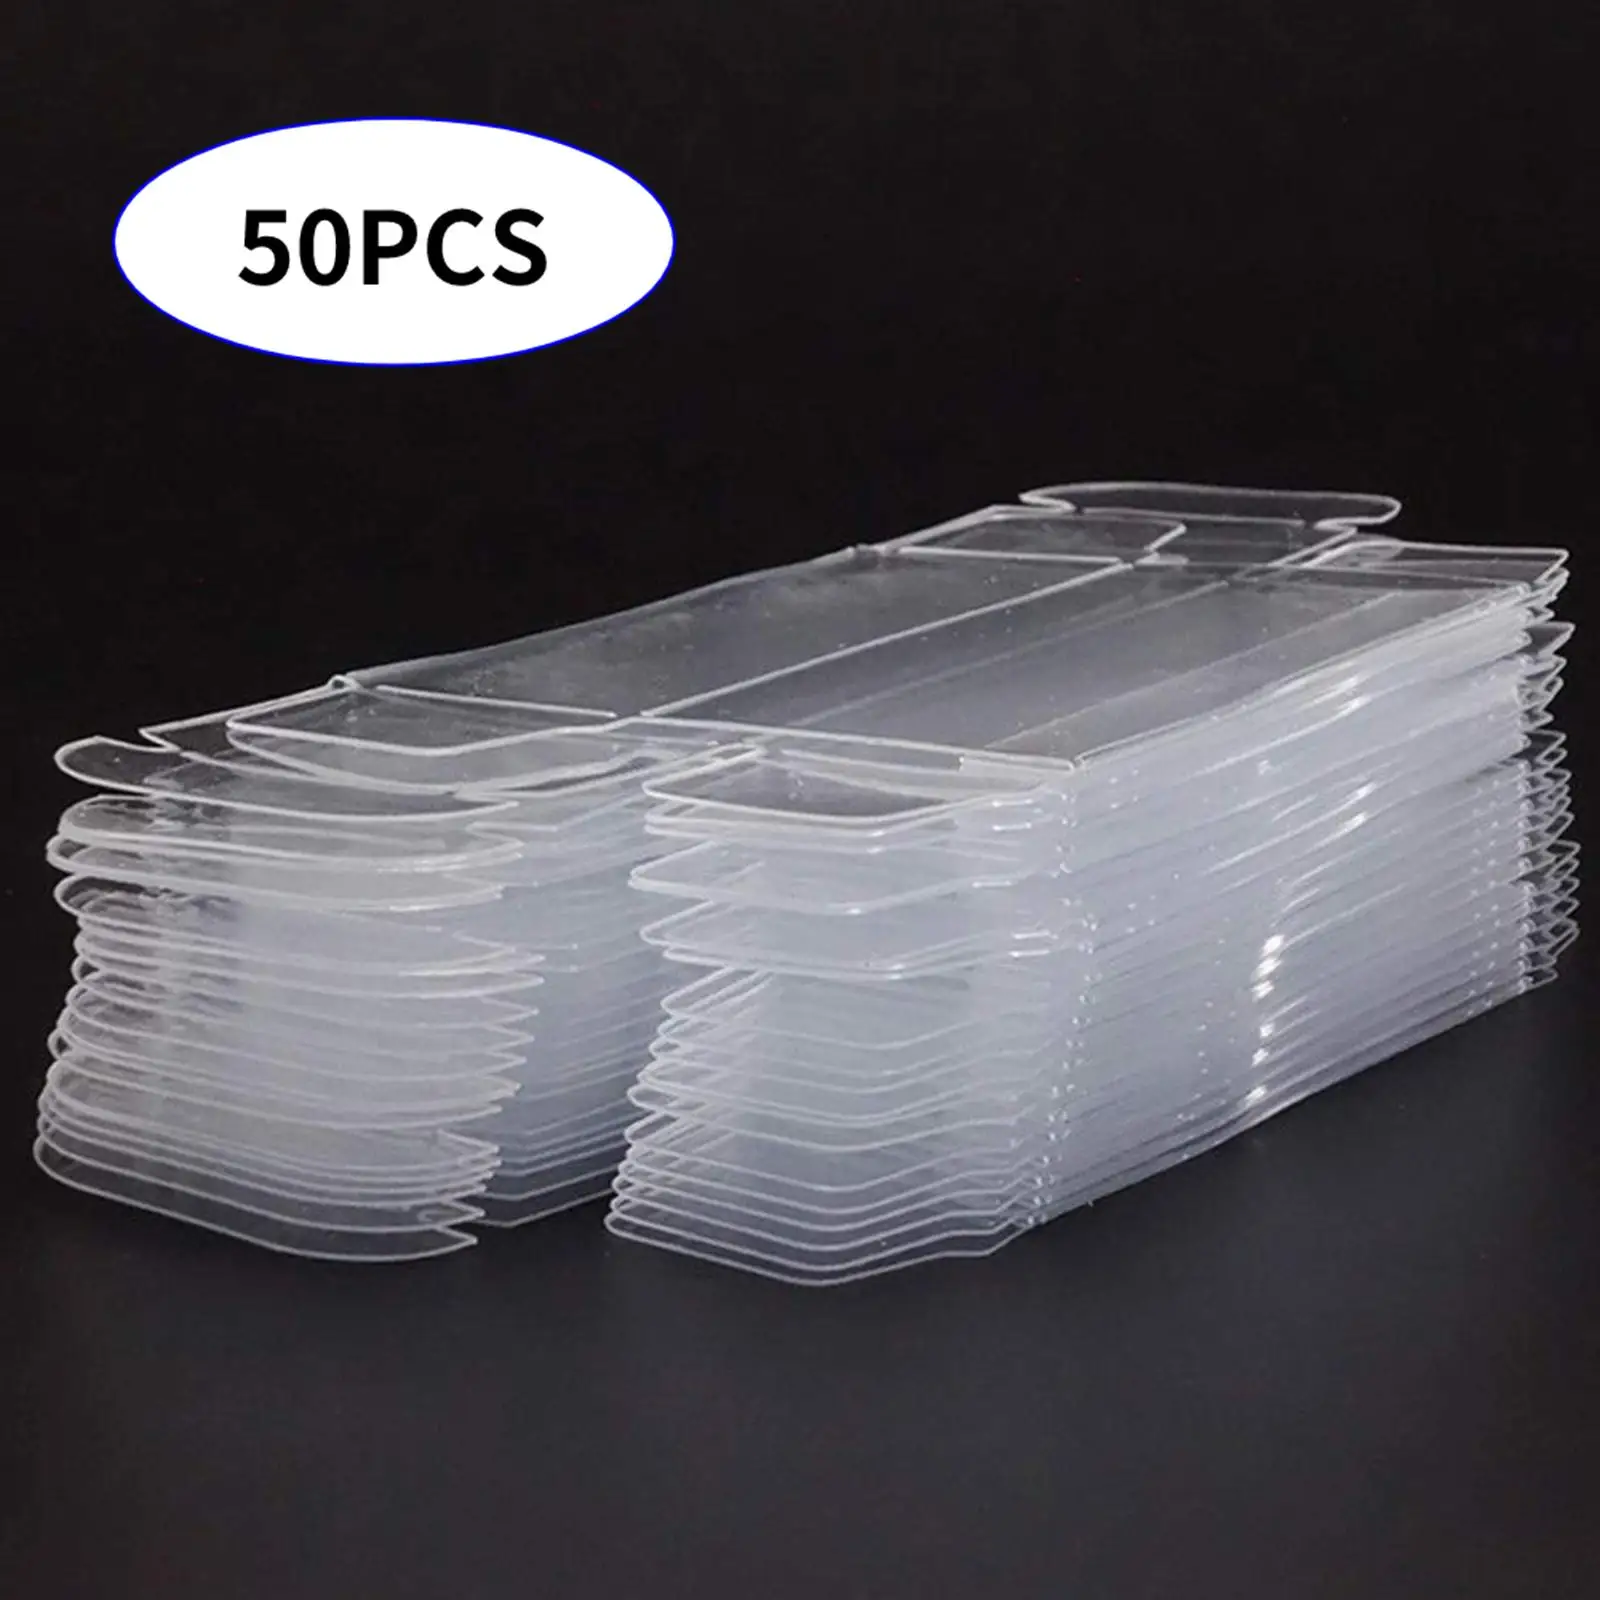 50x 1/64 Protector Clear PVC Cases 1/64 Car Toy Display Showcase for Collectibles Dolls Action Figures Toys Miniature Figurines